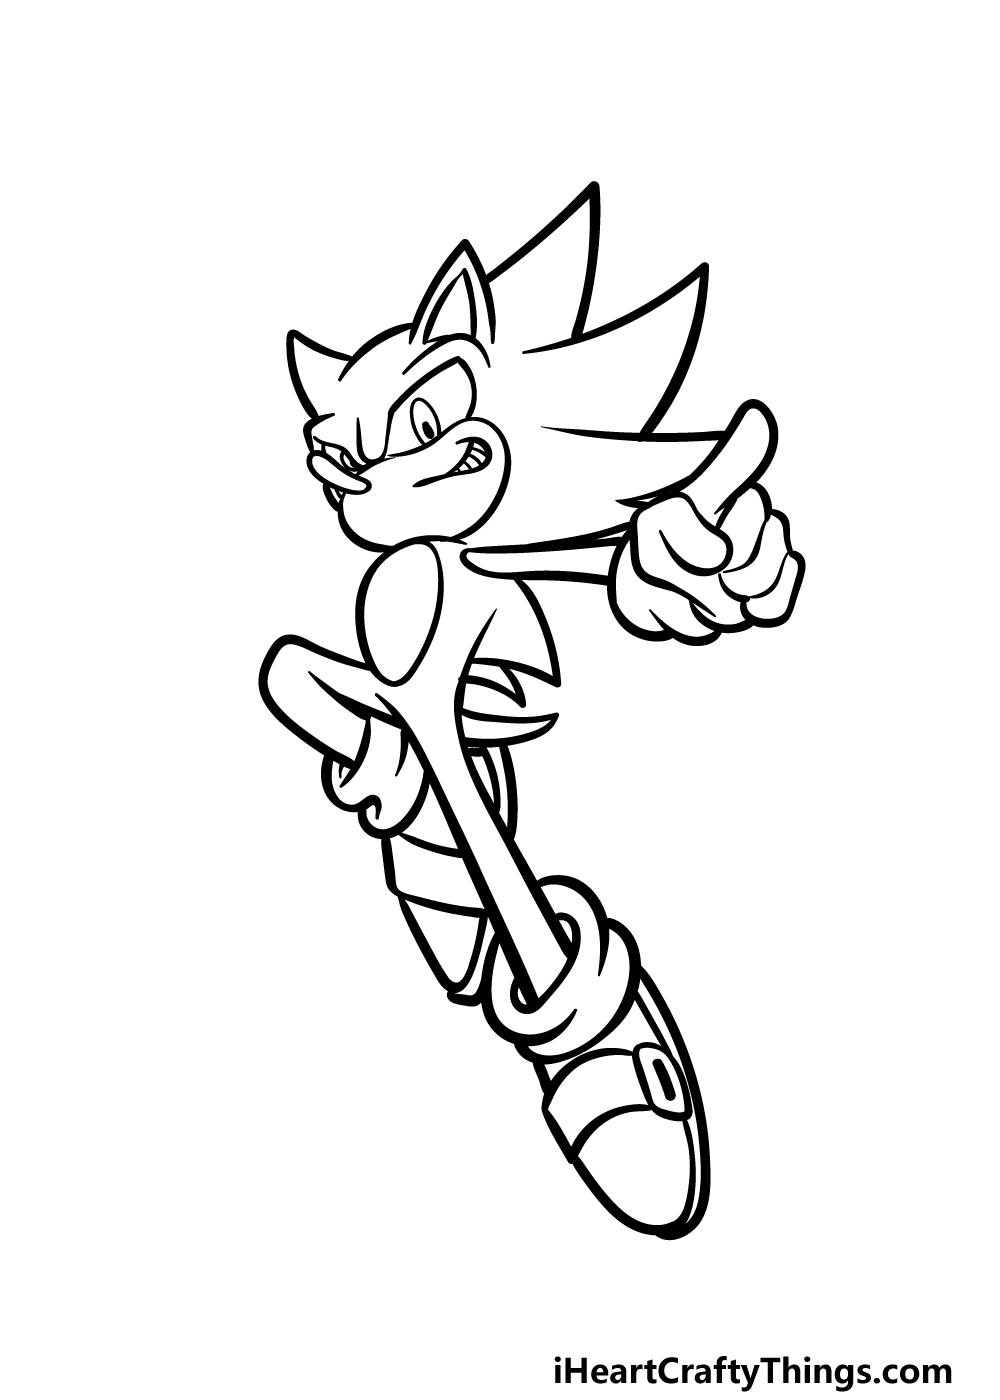 Super Sonic Drawing - How To Draw Super Sonic Step By Step